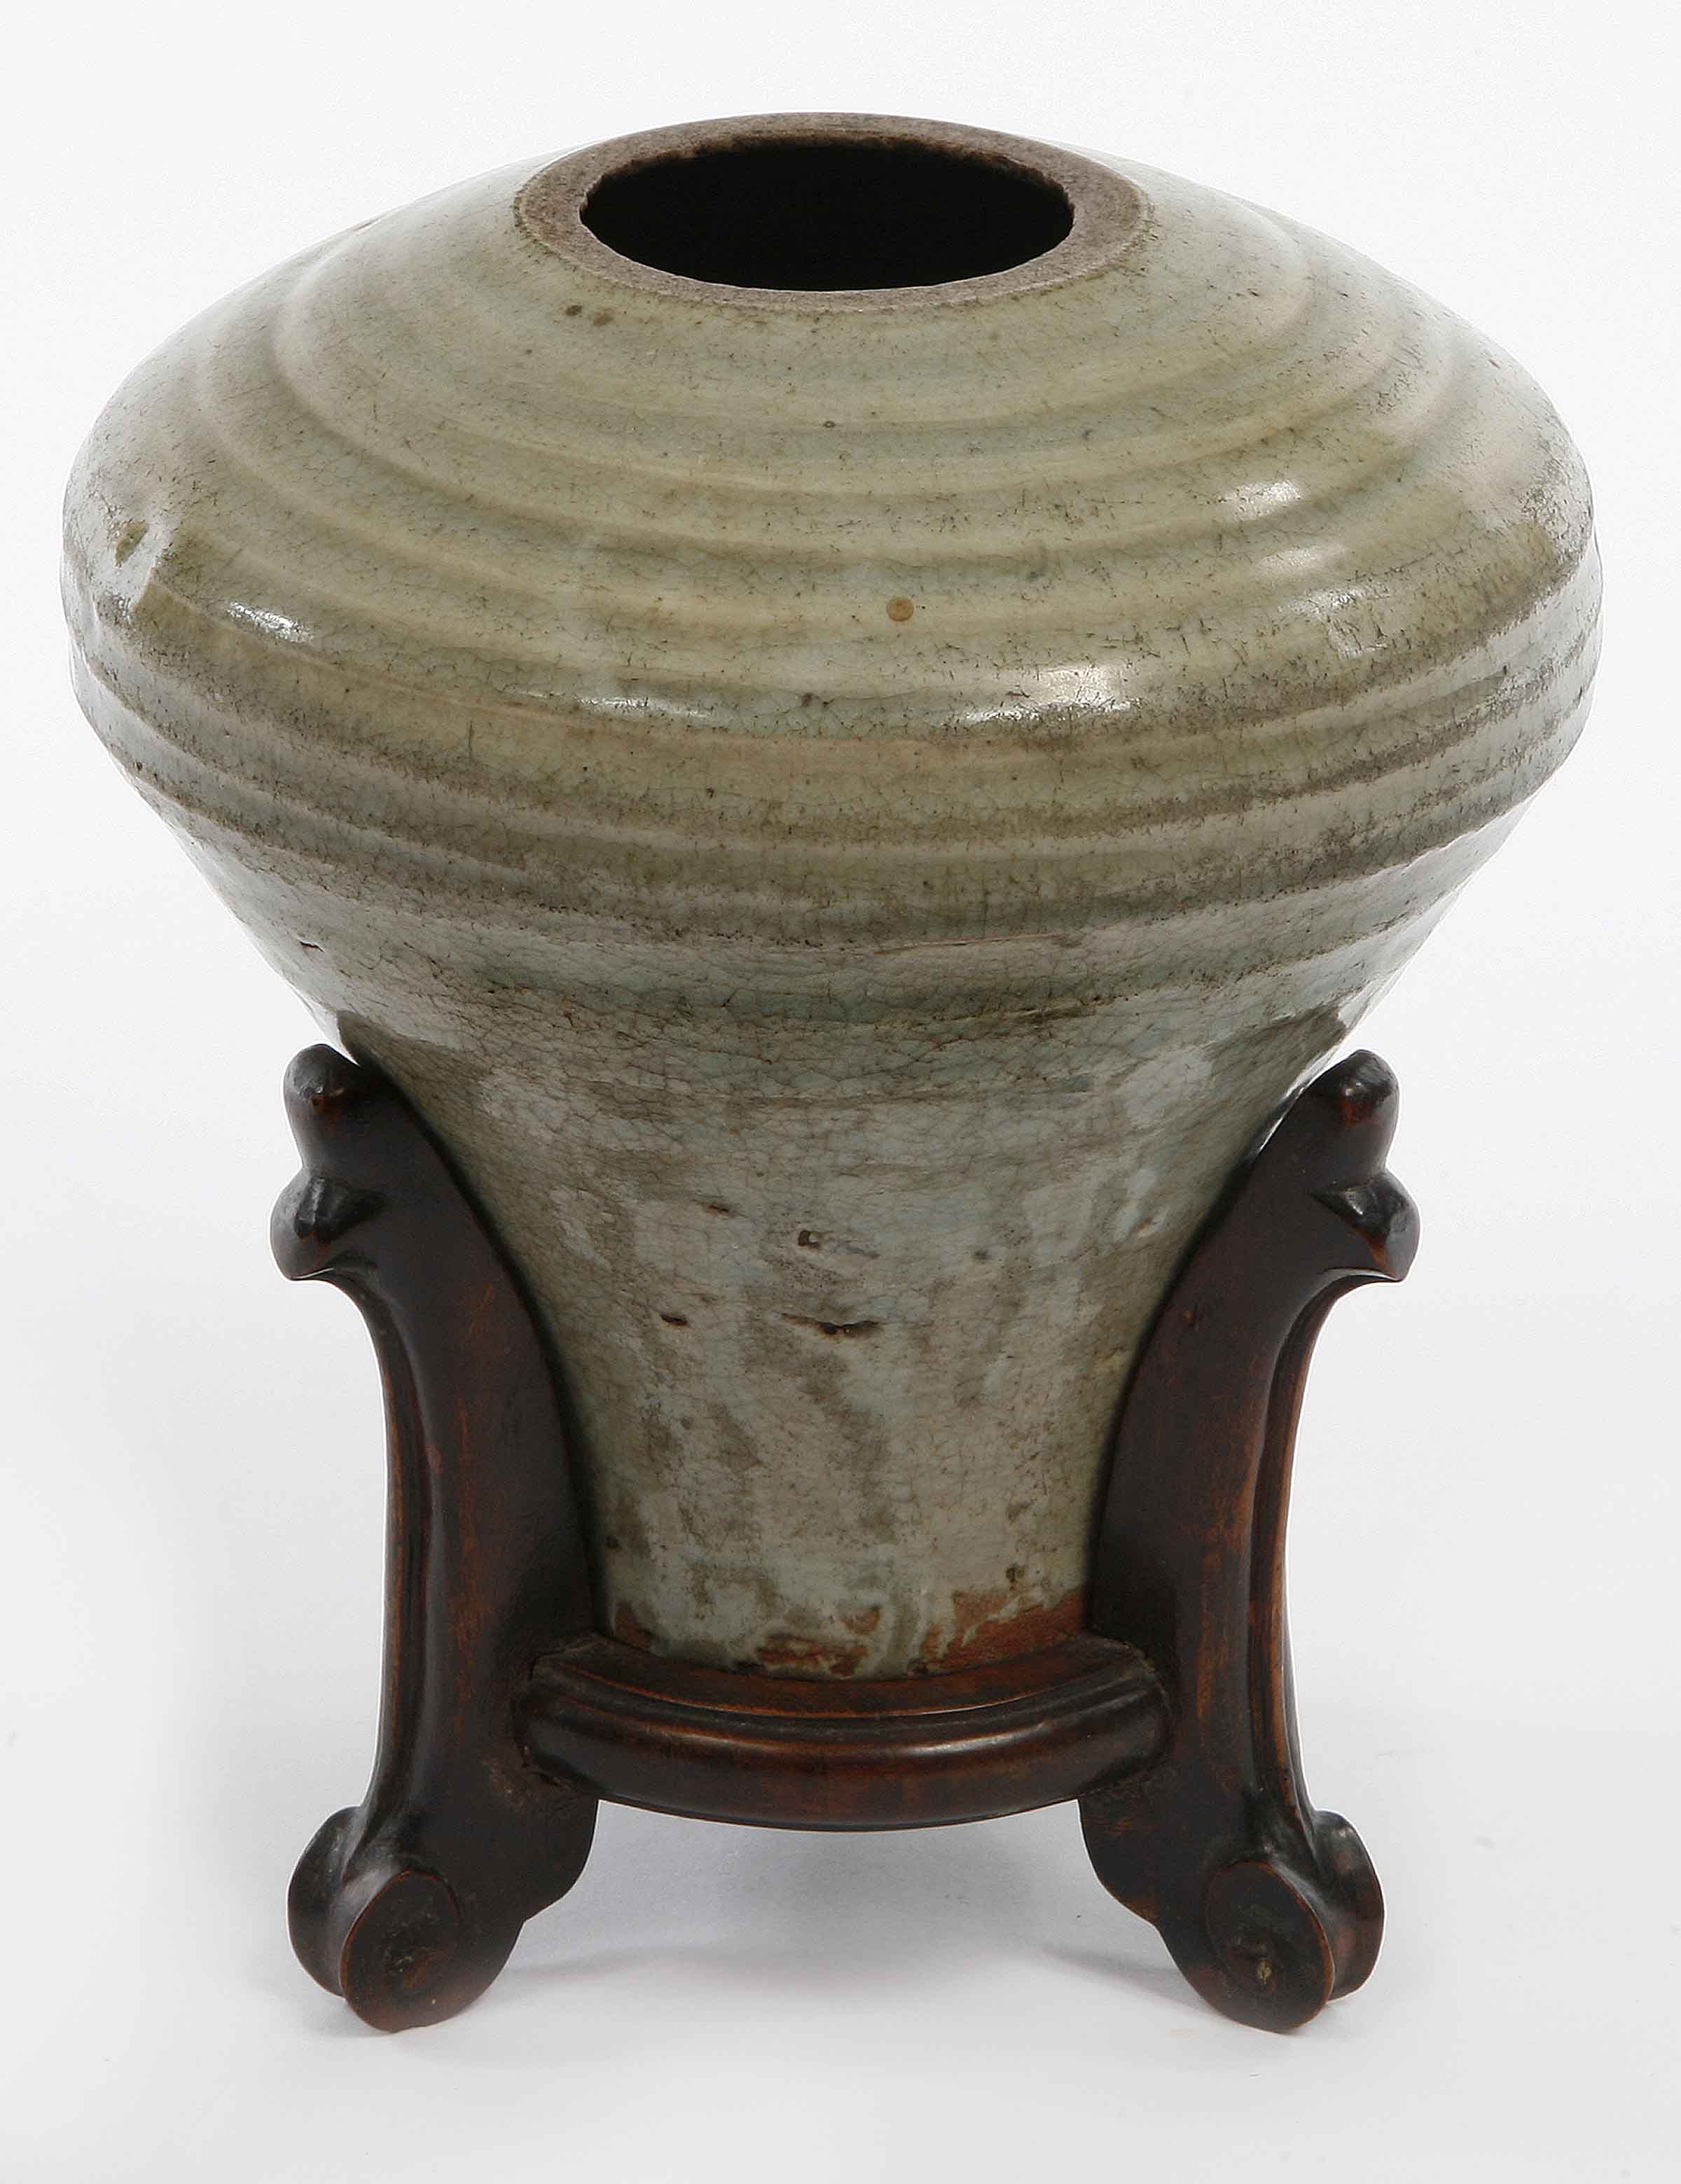 A CHINESE SONG STYLE EARTHENWARE ROUND STORAGE POT, with celadon glaze, 8in (20cm) high, on a